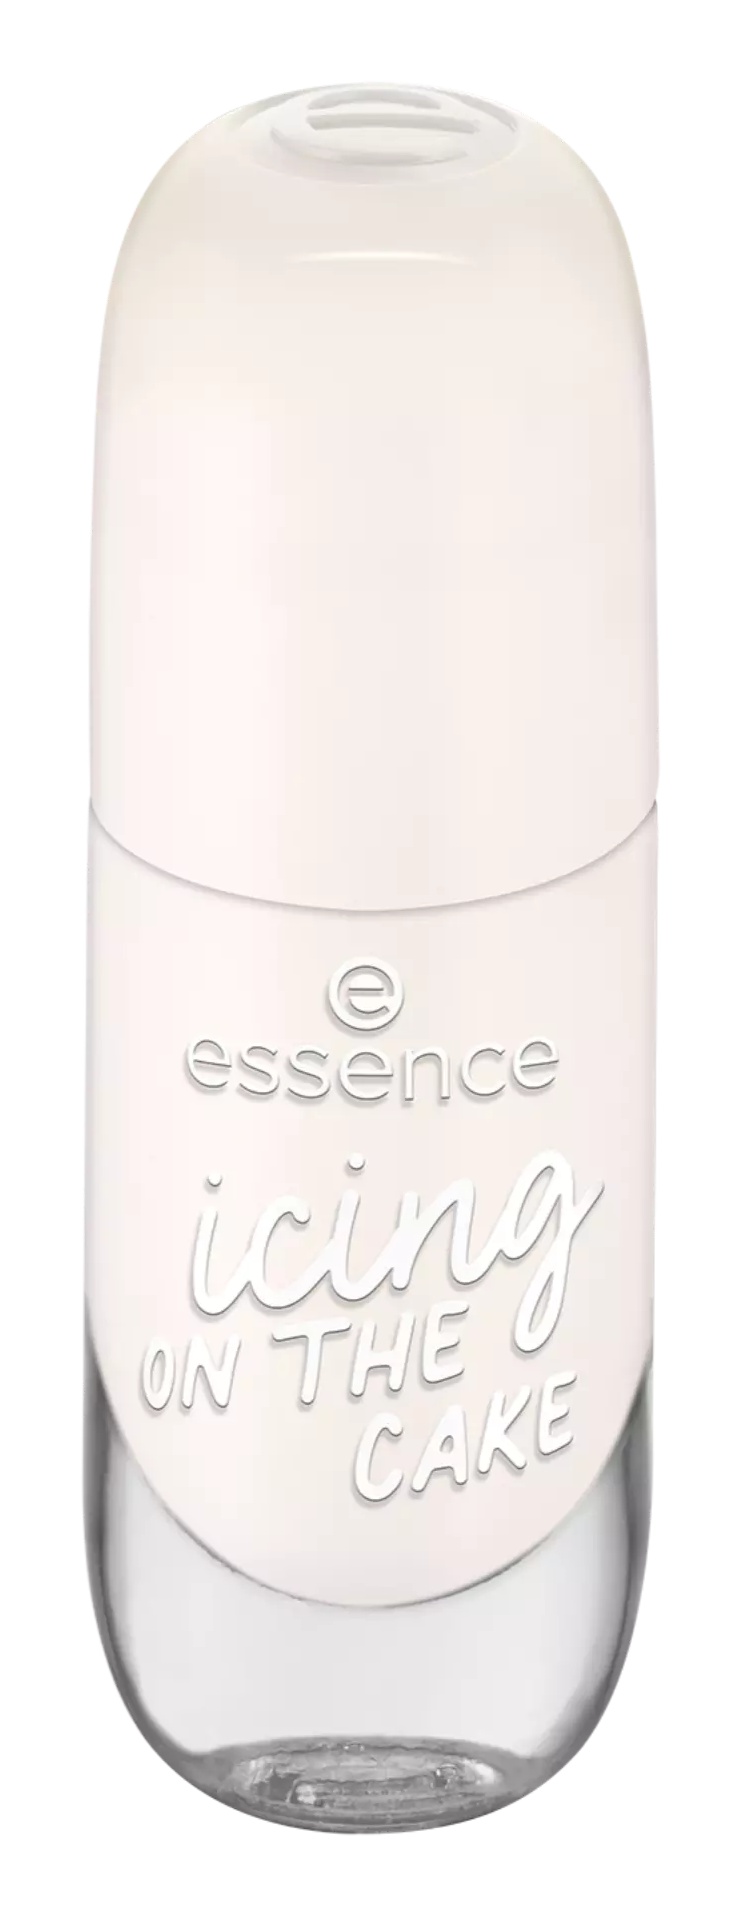 Essence Gel Nail Colour Icing On The Cake